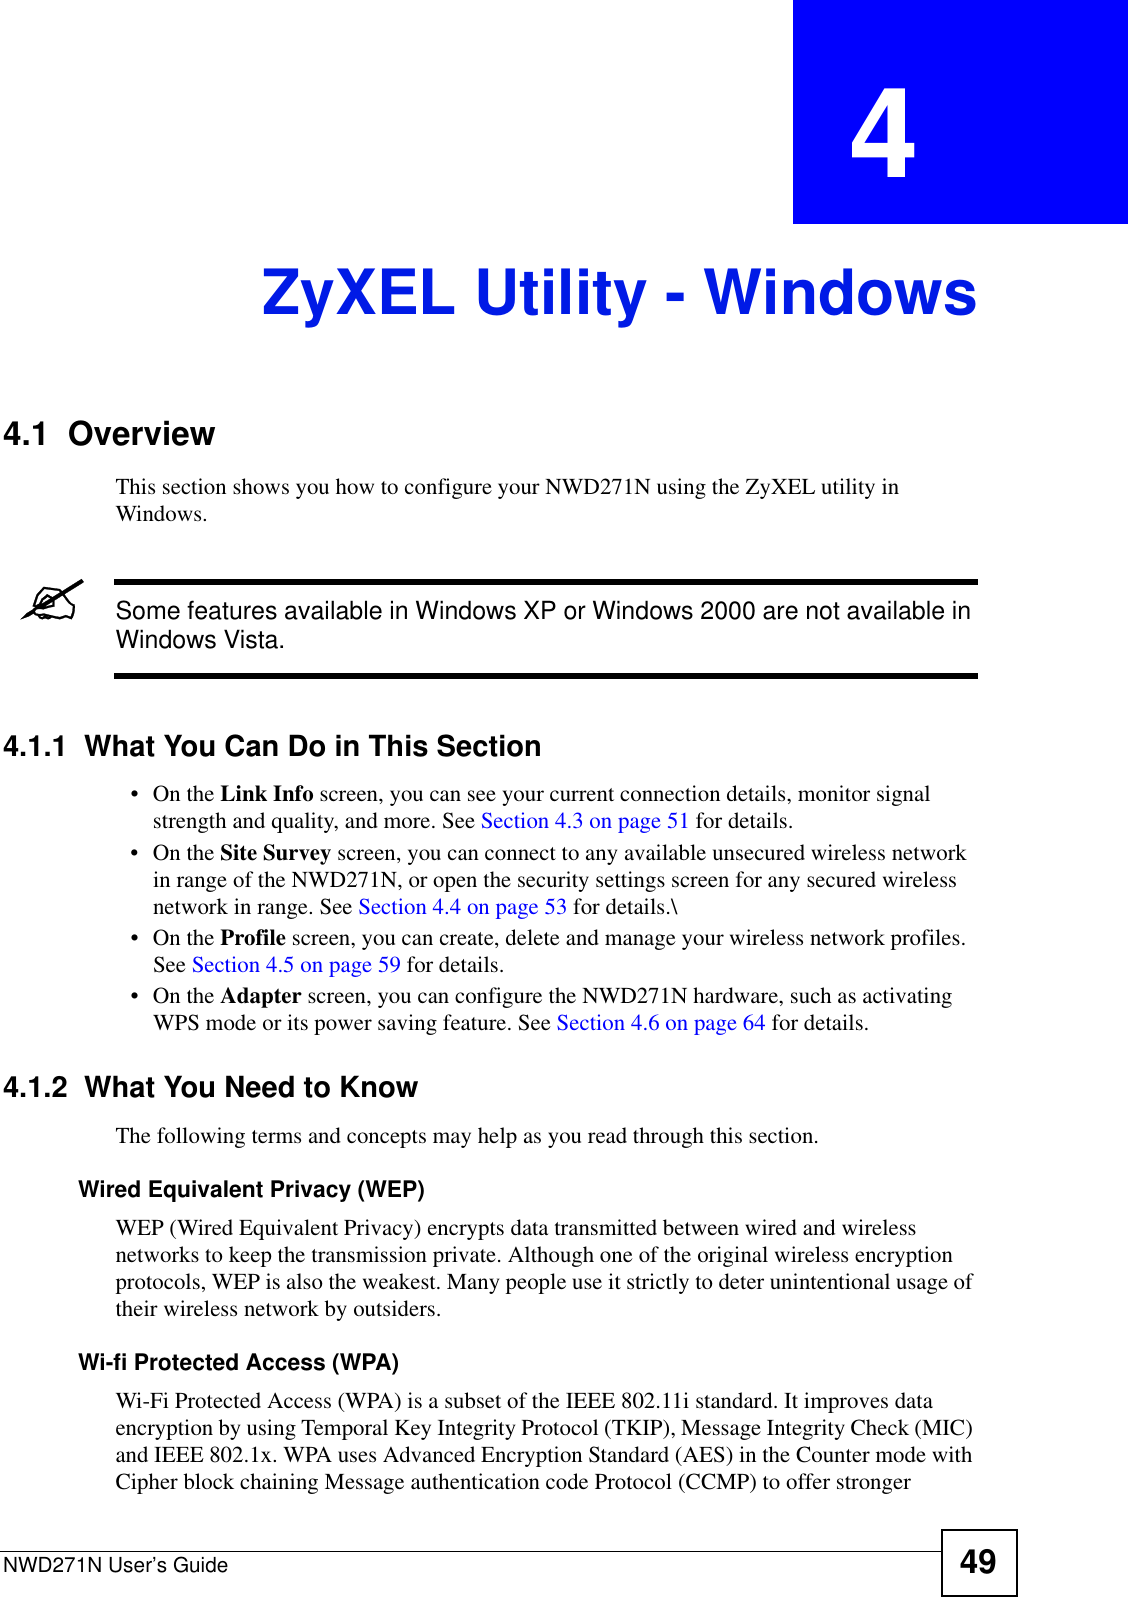 NWD271N User’s Guide 49CHAPTER  4 ZyXEL Utility - Windows4.1  OverviewThis section shows you how to configure your NWD271N using the ZyXEL utility in Windows.&quot;Some features available in Windows XP or Windows 2000 are not available in Windows Vista.4.1.1  What You Can Do in This Section•On the Link Info screen, you can see your current connection details, monitor signal strength and quality, and more. See Section 4.3 on page 51 for details.•On the Site Survey screen, you can connect to any available unsecured wireless network in range of the NWD271N, or open the security settings screen for any secured wireless network in range. See Section 4.4 on page 53 for details.\•On the Profile screen, you can create, delete and manage your wireless network profiles. See Section 4.5 on page 59 for details.•On the Adapter screen, you can configure the NWD271N hardware, such as activating WPS mode or its power saving feature. See Section 4.6 on page 64 for details.4.1.2  What You Need to KnowThe following terms and concepts may help as you read through this section.Wired Equivalent Privacy (WEP)WEP (Wired Equivalent Privacy) encrypts data transmitted between wired and wireless networks to keep the transmission private. Although one of the original wireless encryption protocols, WEP is also the weakest. Many people use it strictly to deter unintentional usage of their wireless network by outsiders.Wi-fi Protected Access (WPA)Wi-Fi Protected Access (WPA) is a subset of the IEEE 802.11i standard. It improves data encryption by using Temporal Key Integrity Protocol (TKIP), Message Integrity Check (MIC) and IEEE 802.1x. WPA uses Advanced Encryption Standard (AES) in the Counter mode with Cipher block chaining Message authentication code Protocol (CCMP) to offer stronger 